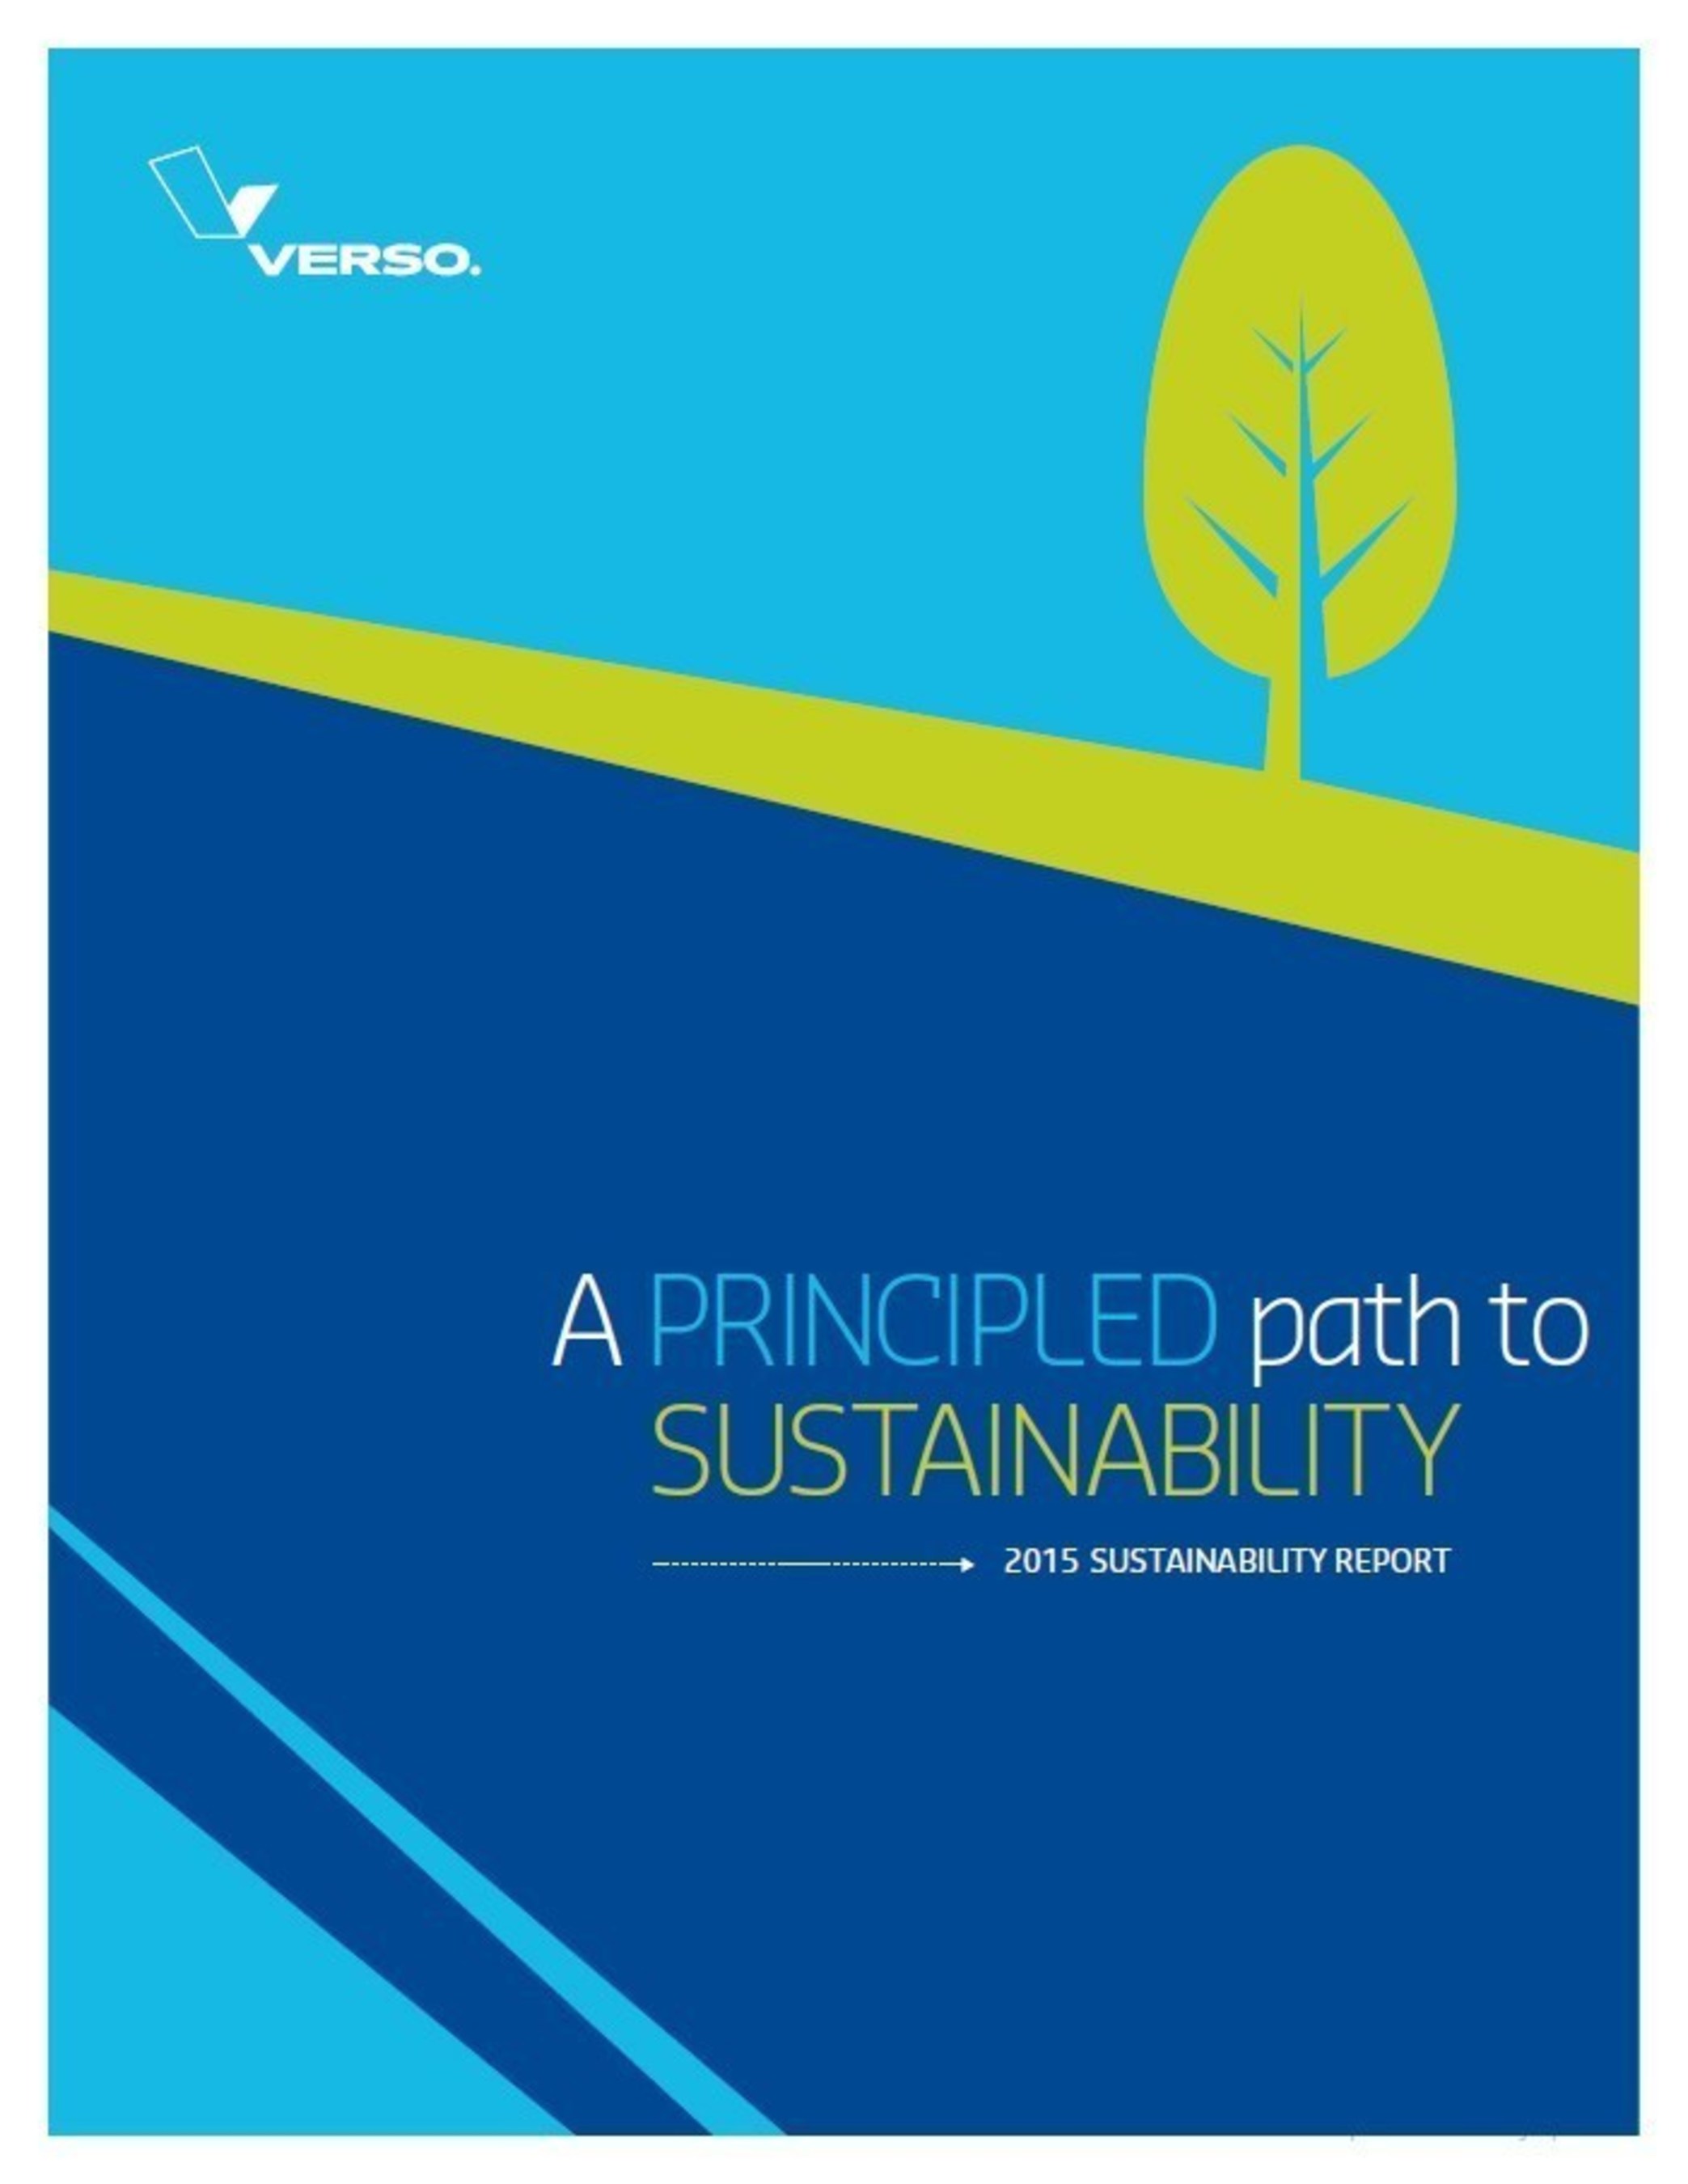 Verso Publishes 2015 Sustainability Report: A Principled Path to Sustainability